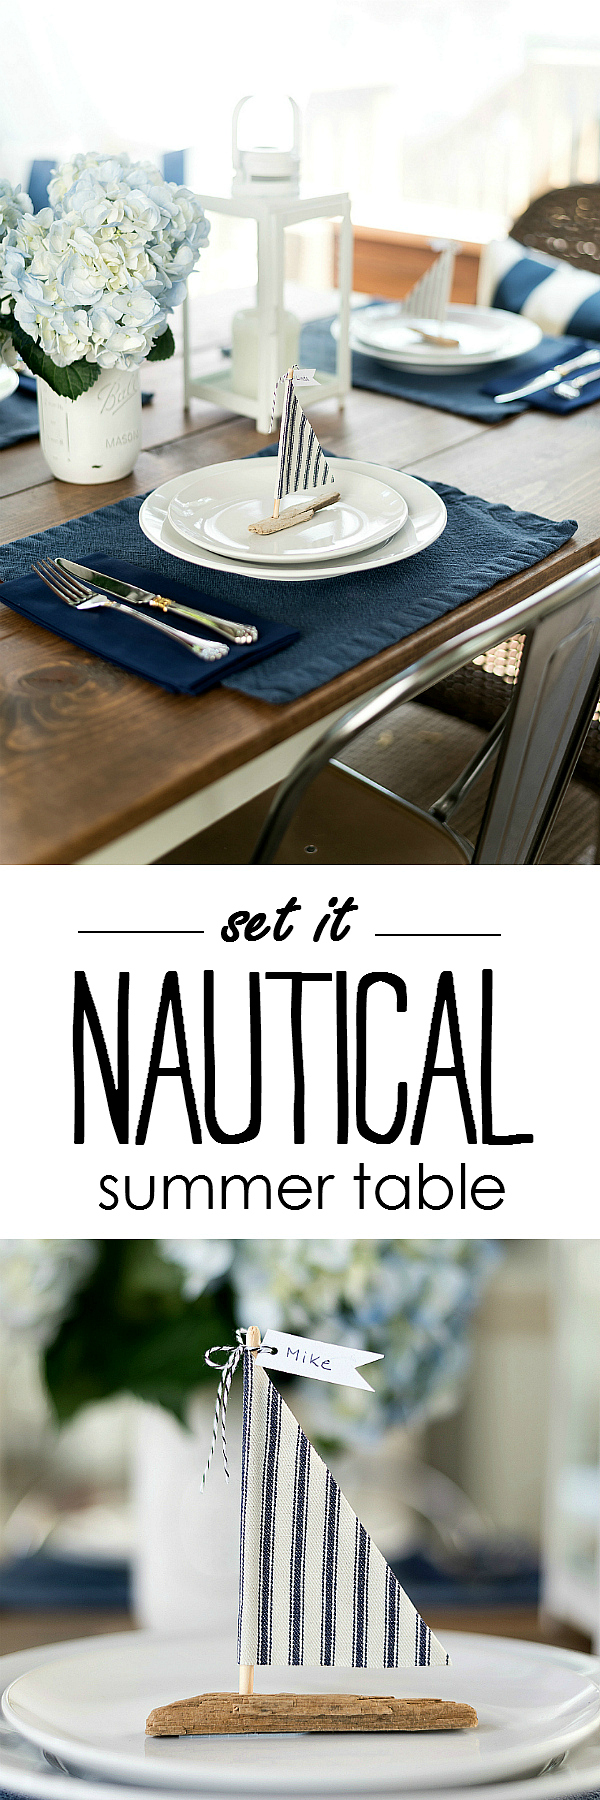 Nautical Table Setting Idea - Summer Table Setting Ideas with Navy and White @It All Started With Paint www.itallstartedwithpaint.com